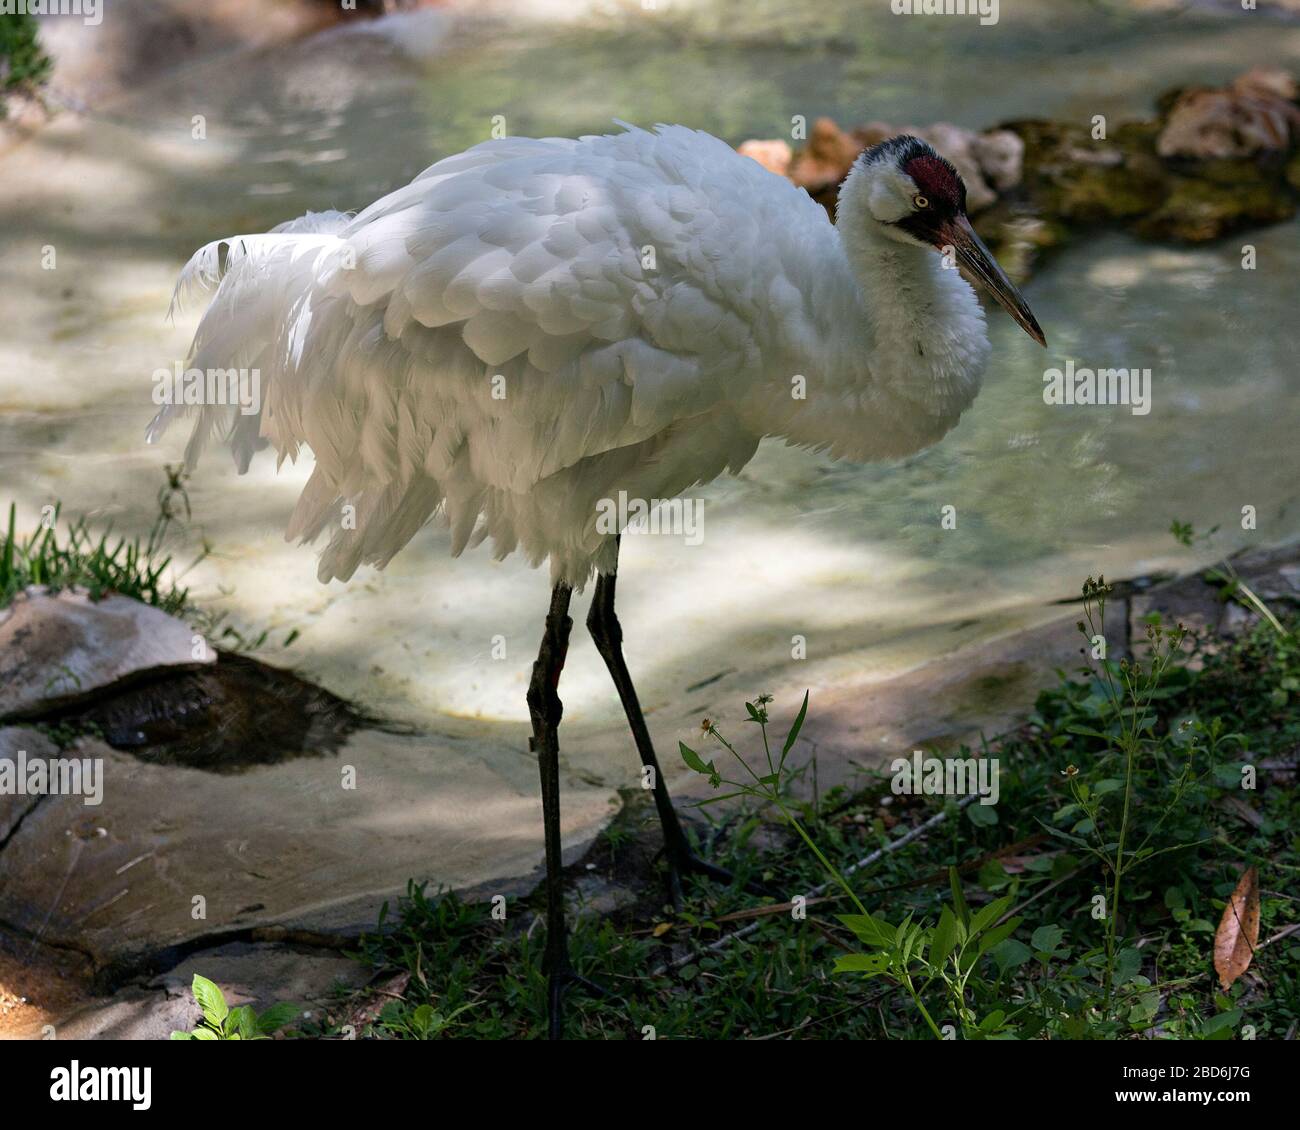 Whooping crane bird close-up profile view standing tall by the water with fluffy feathers plumage with foliage foreground in its surrounding and envir Stock Photo